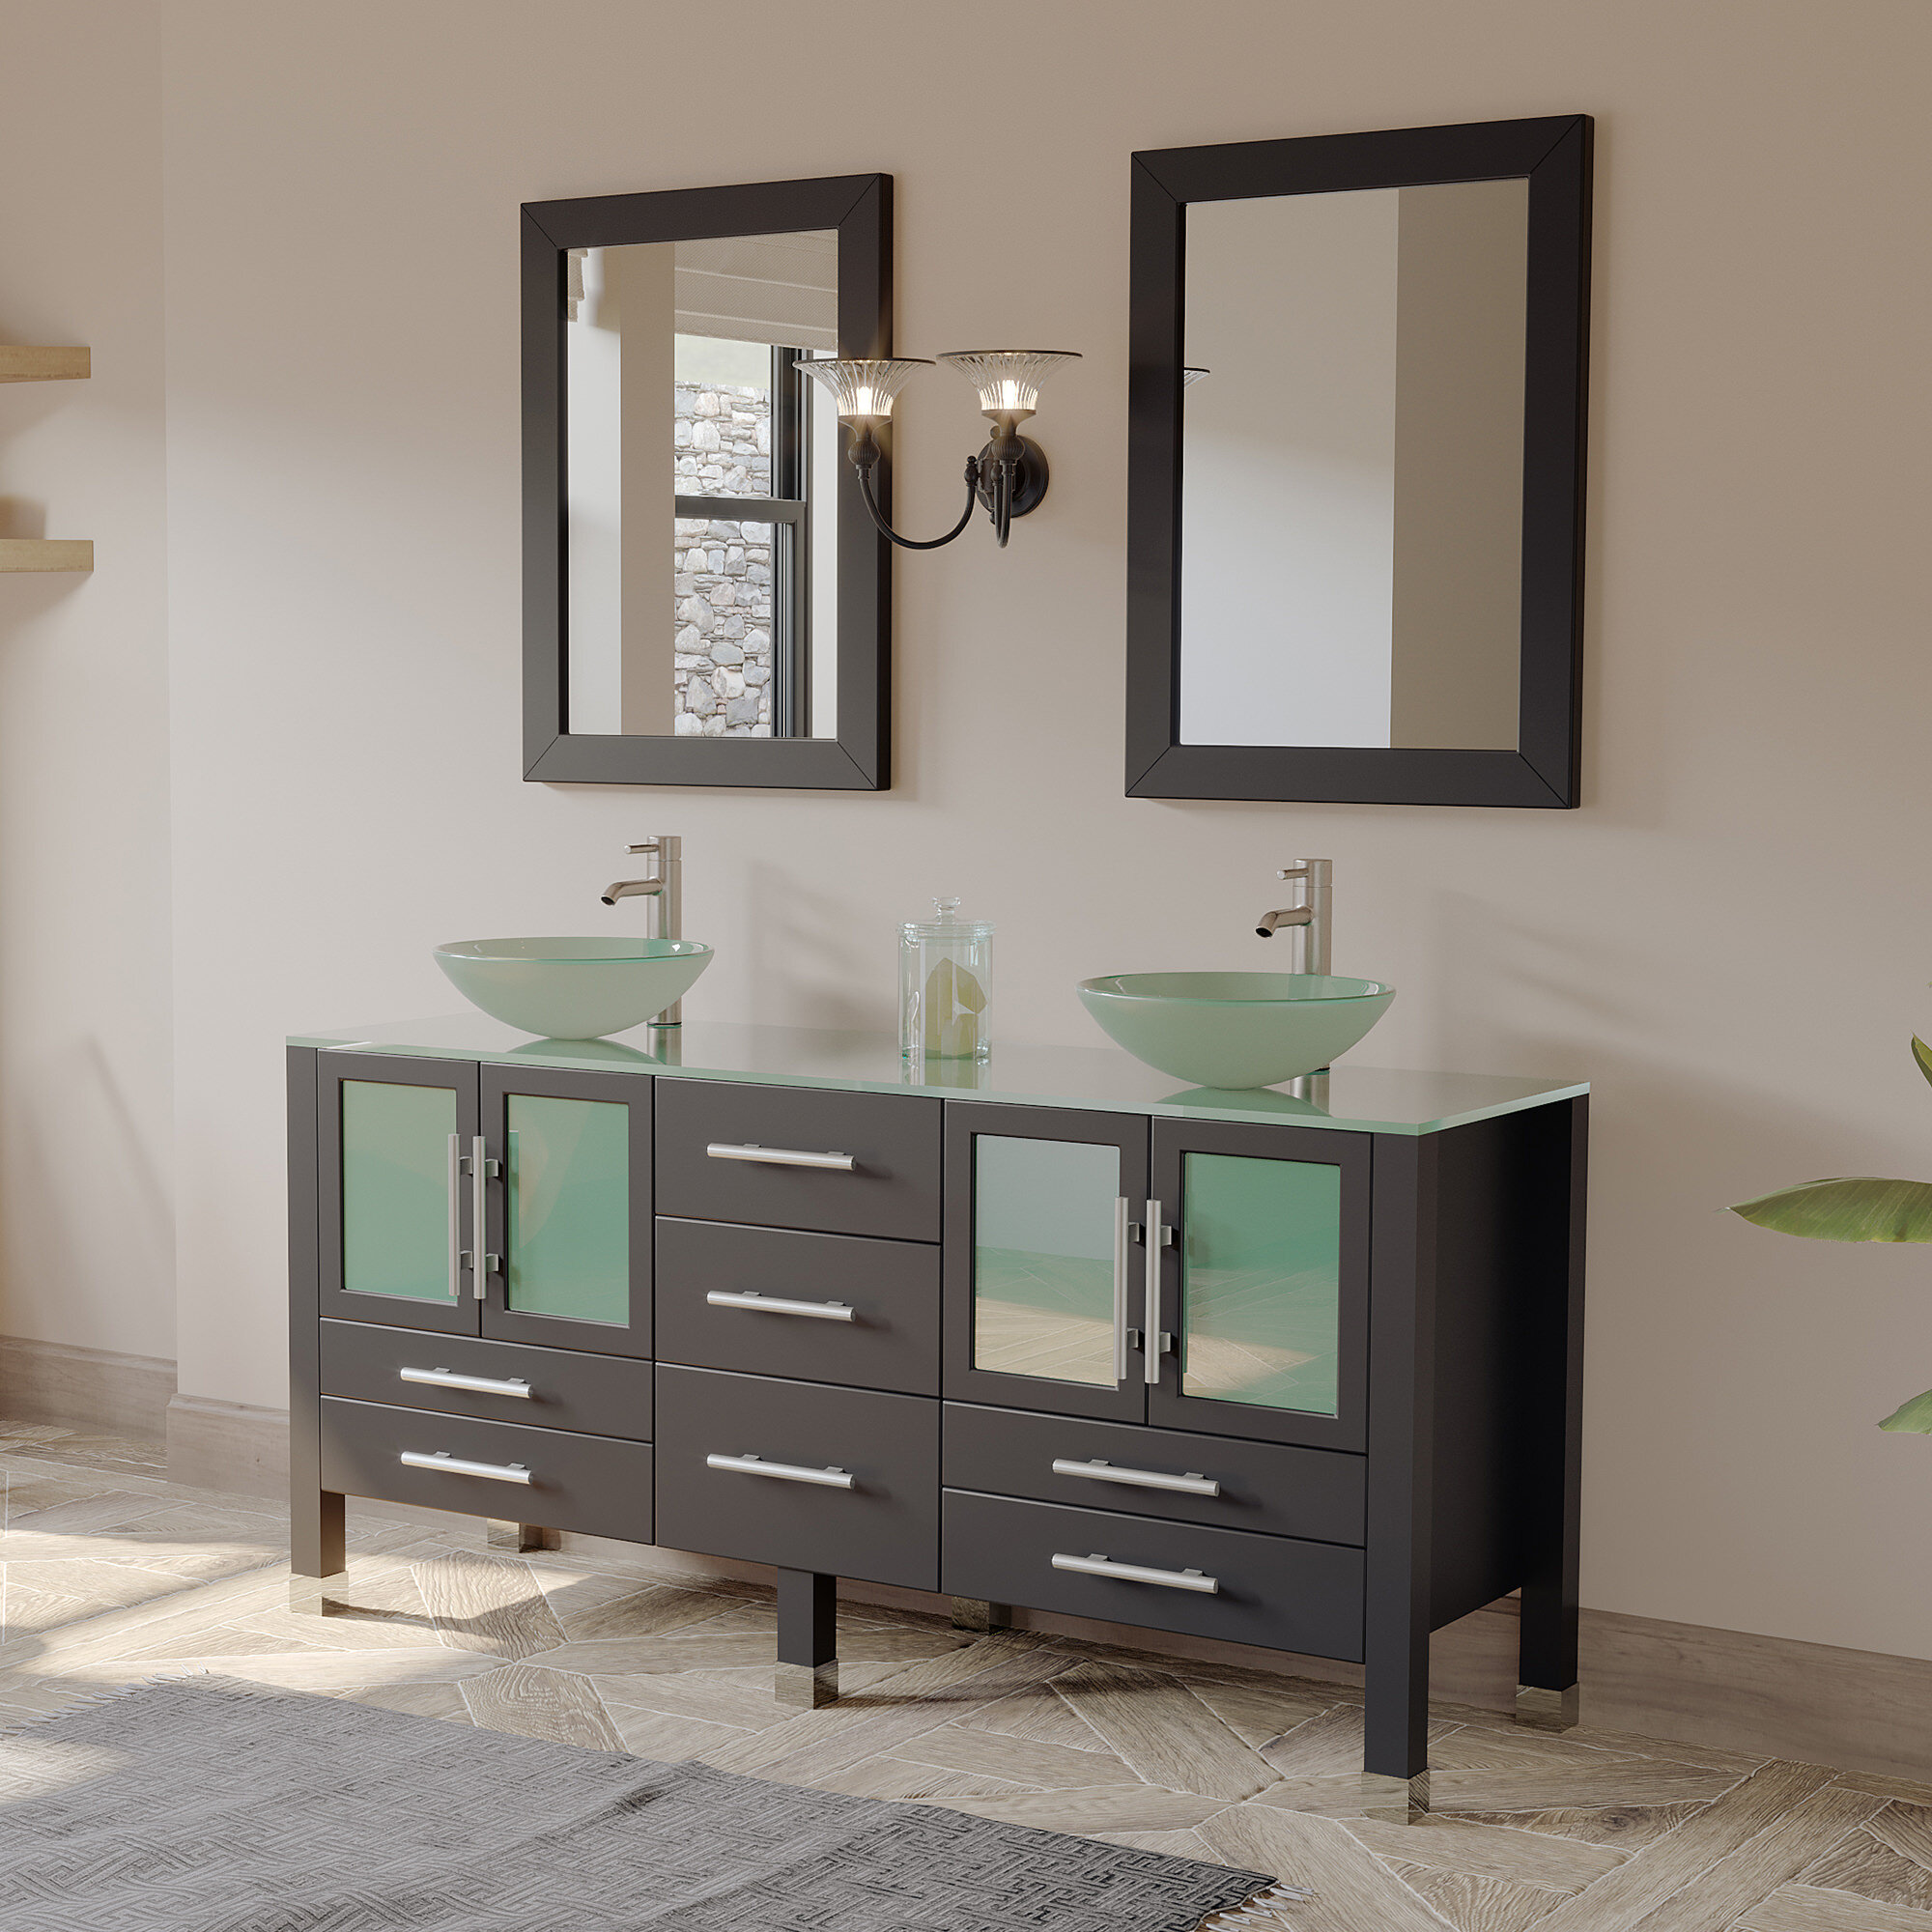 Meserve Solid Wood And Glass Vessel 64 Double Bathroom Vanity Set With Mirror